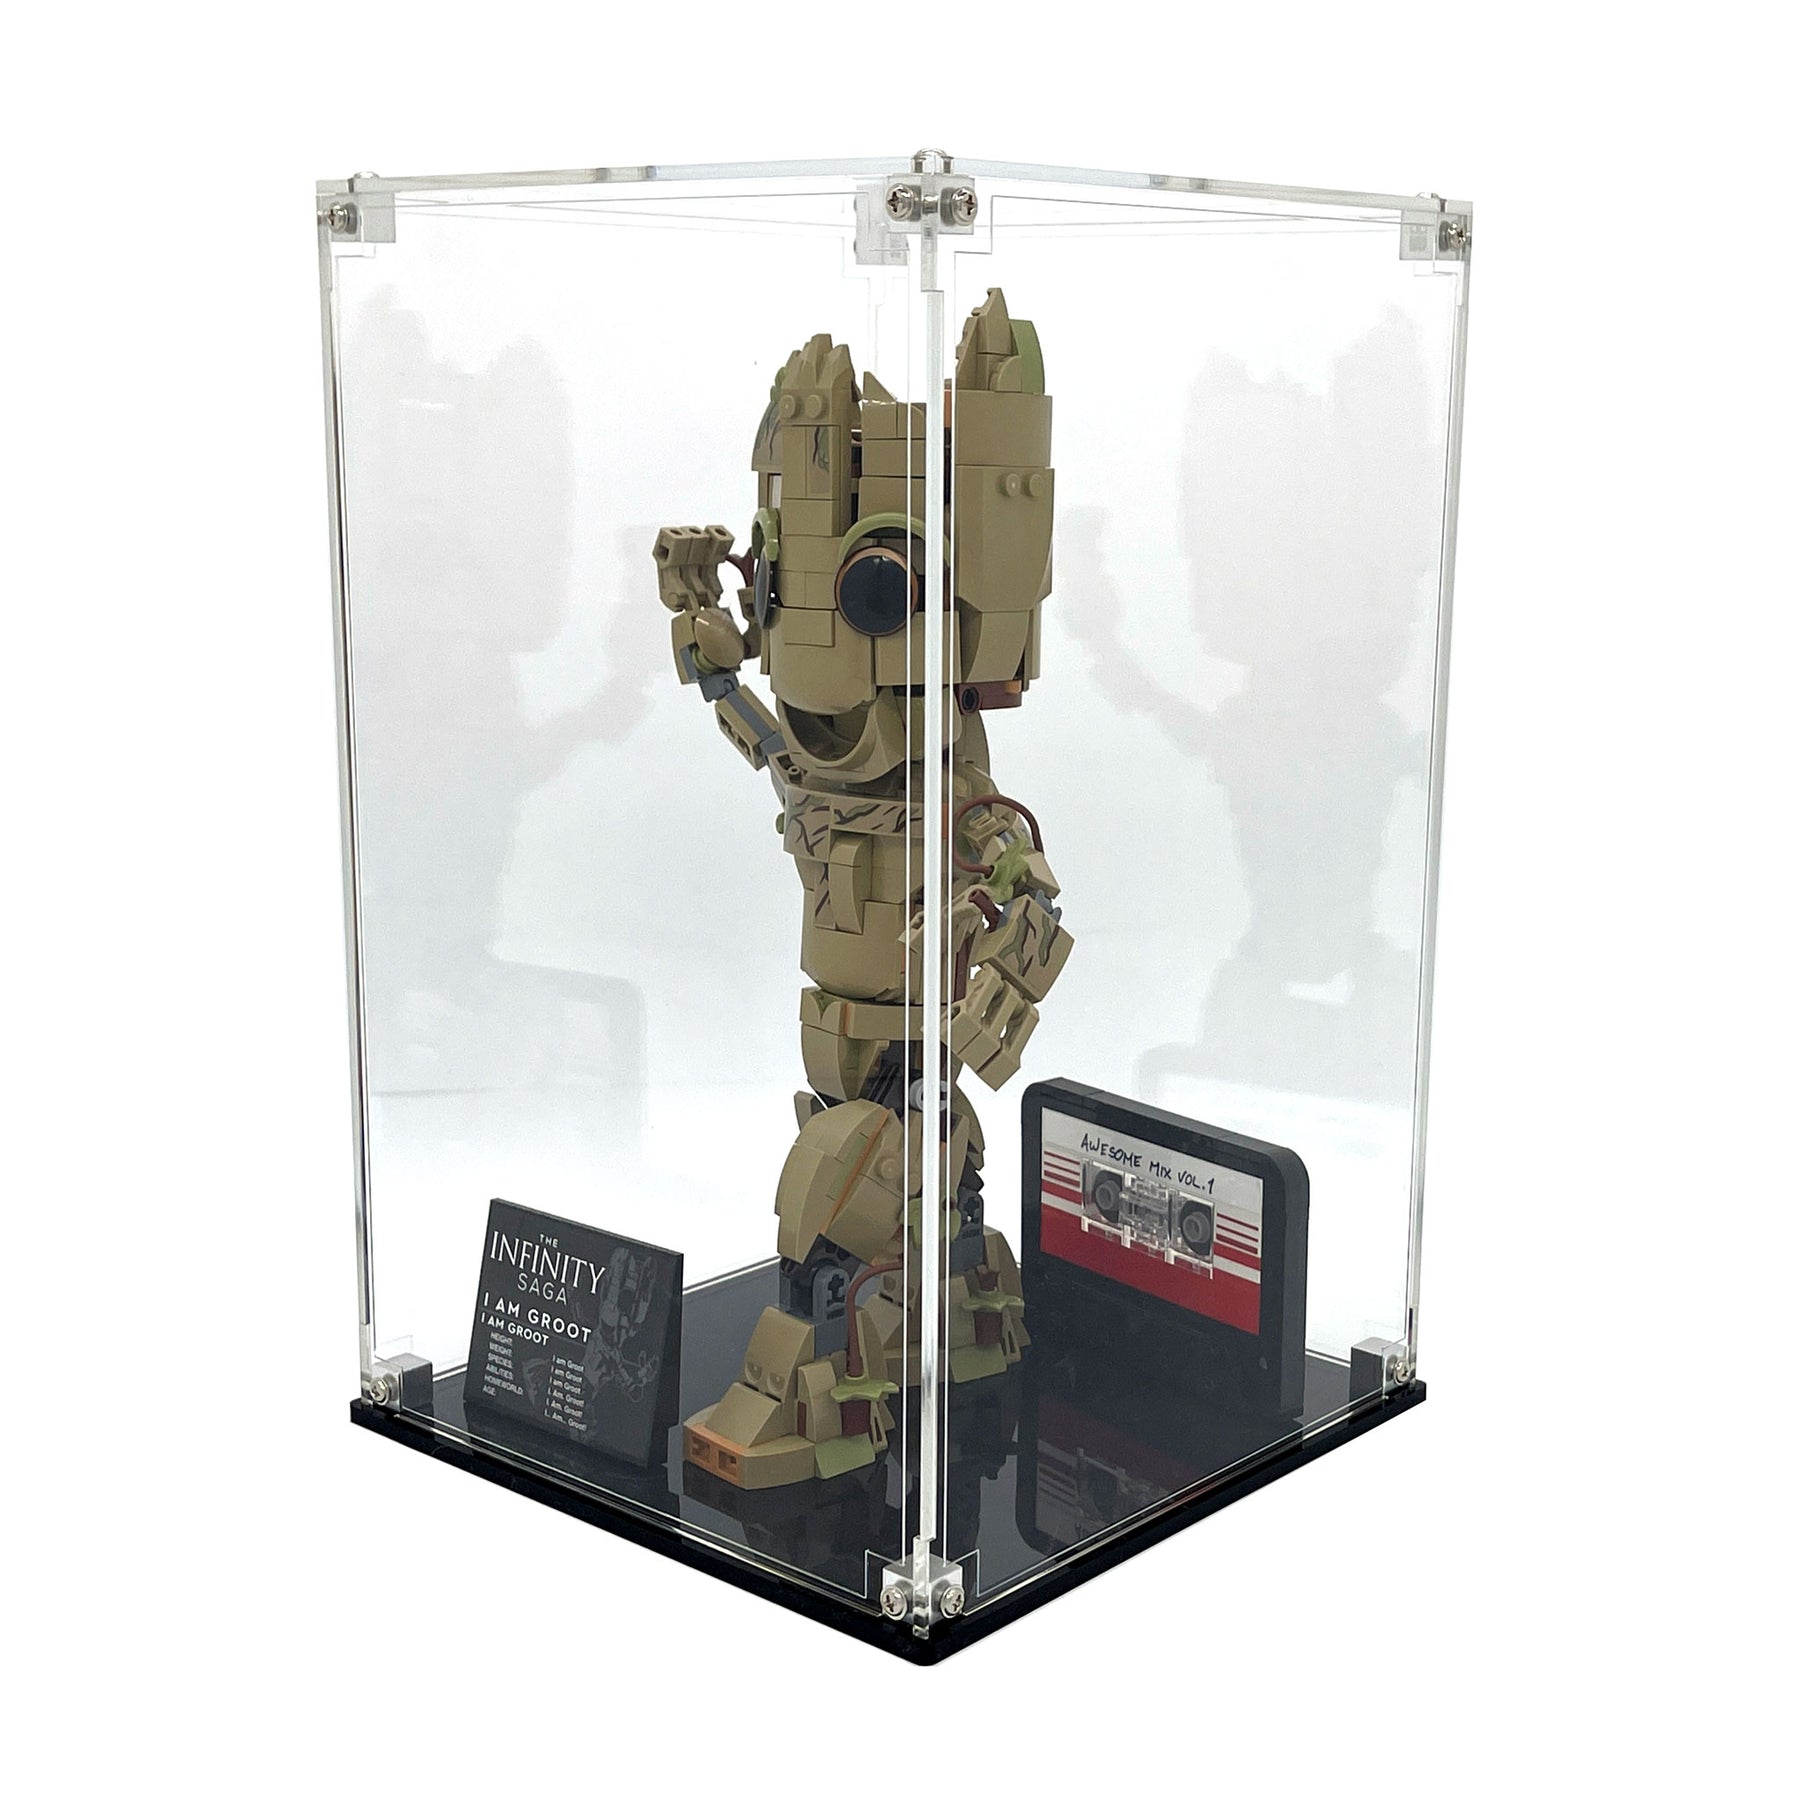 Acrylic Display Stand for the LEGO® MARVEL I Am Groot 76217 